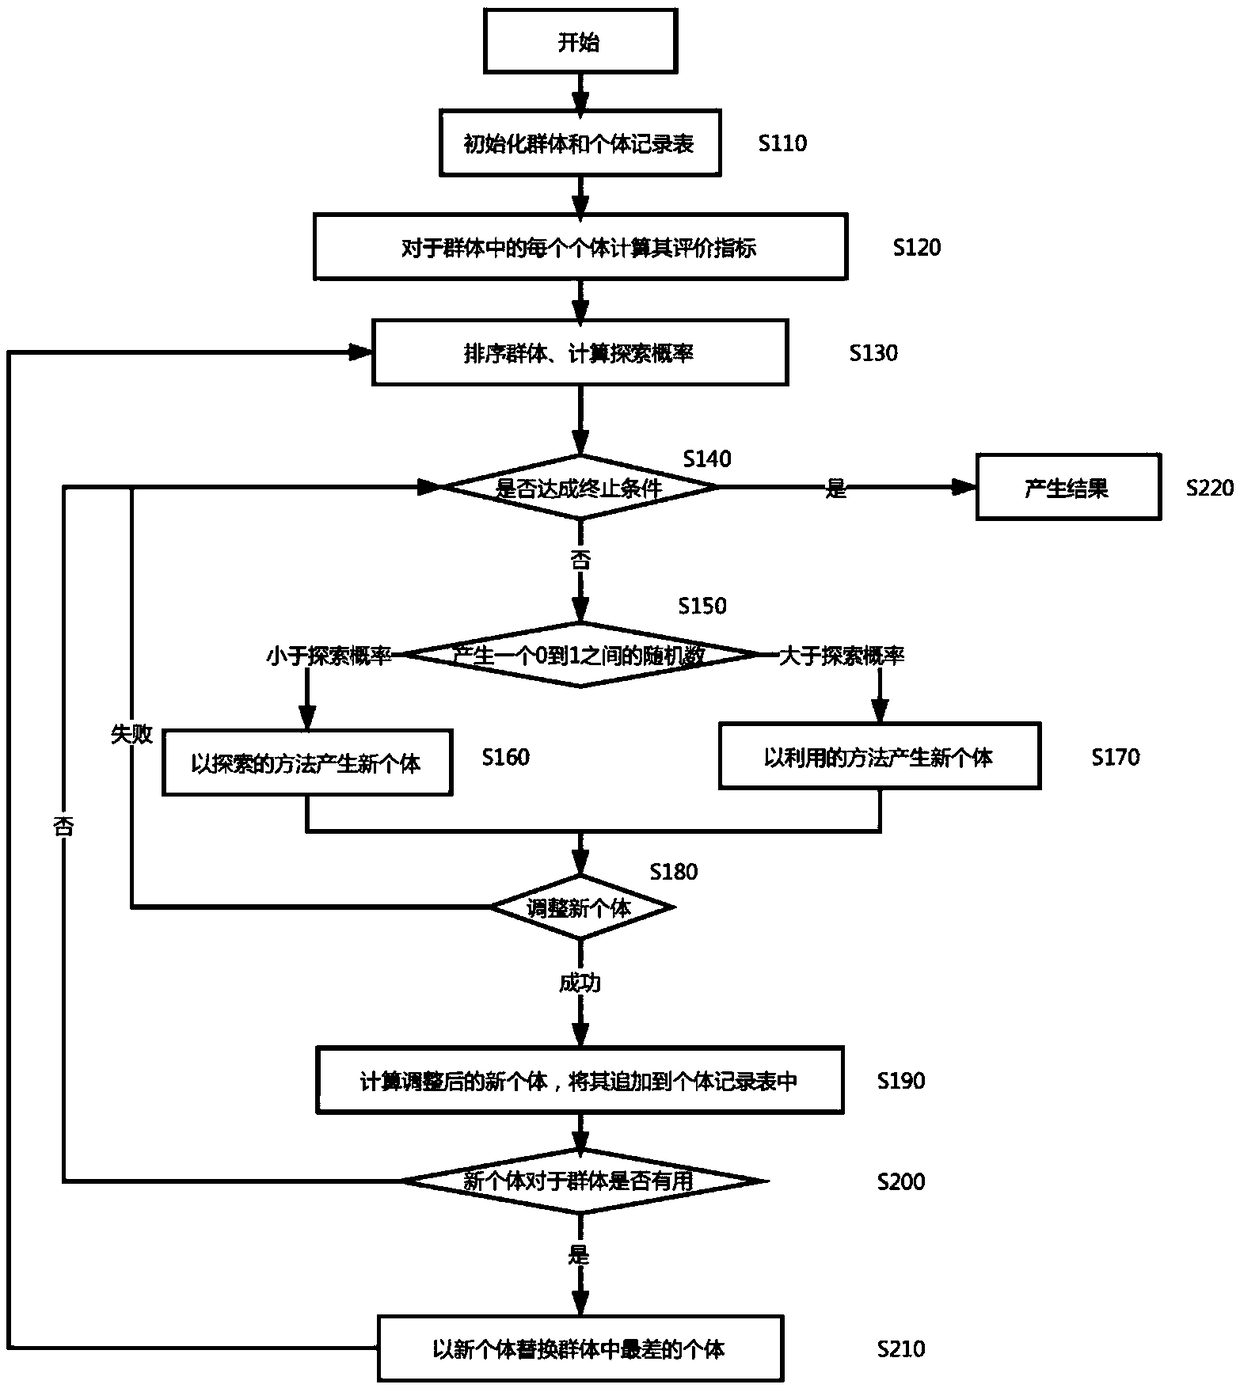 Method for exploring disease-related SNP combination based on evolutionary algorithm in genome-wide association analysis data